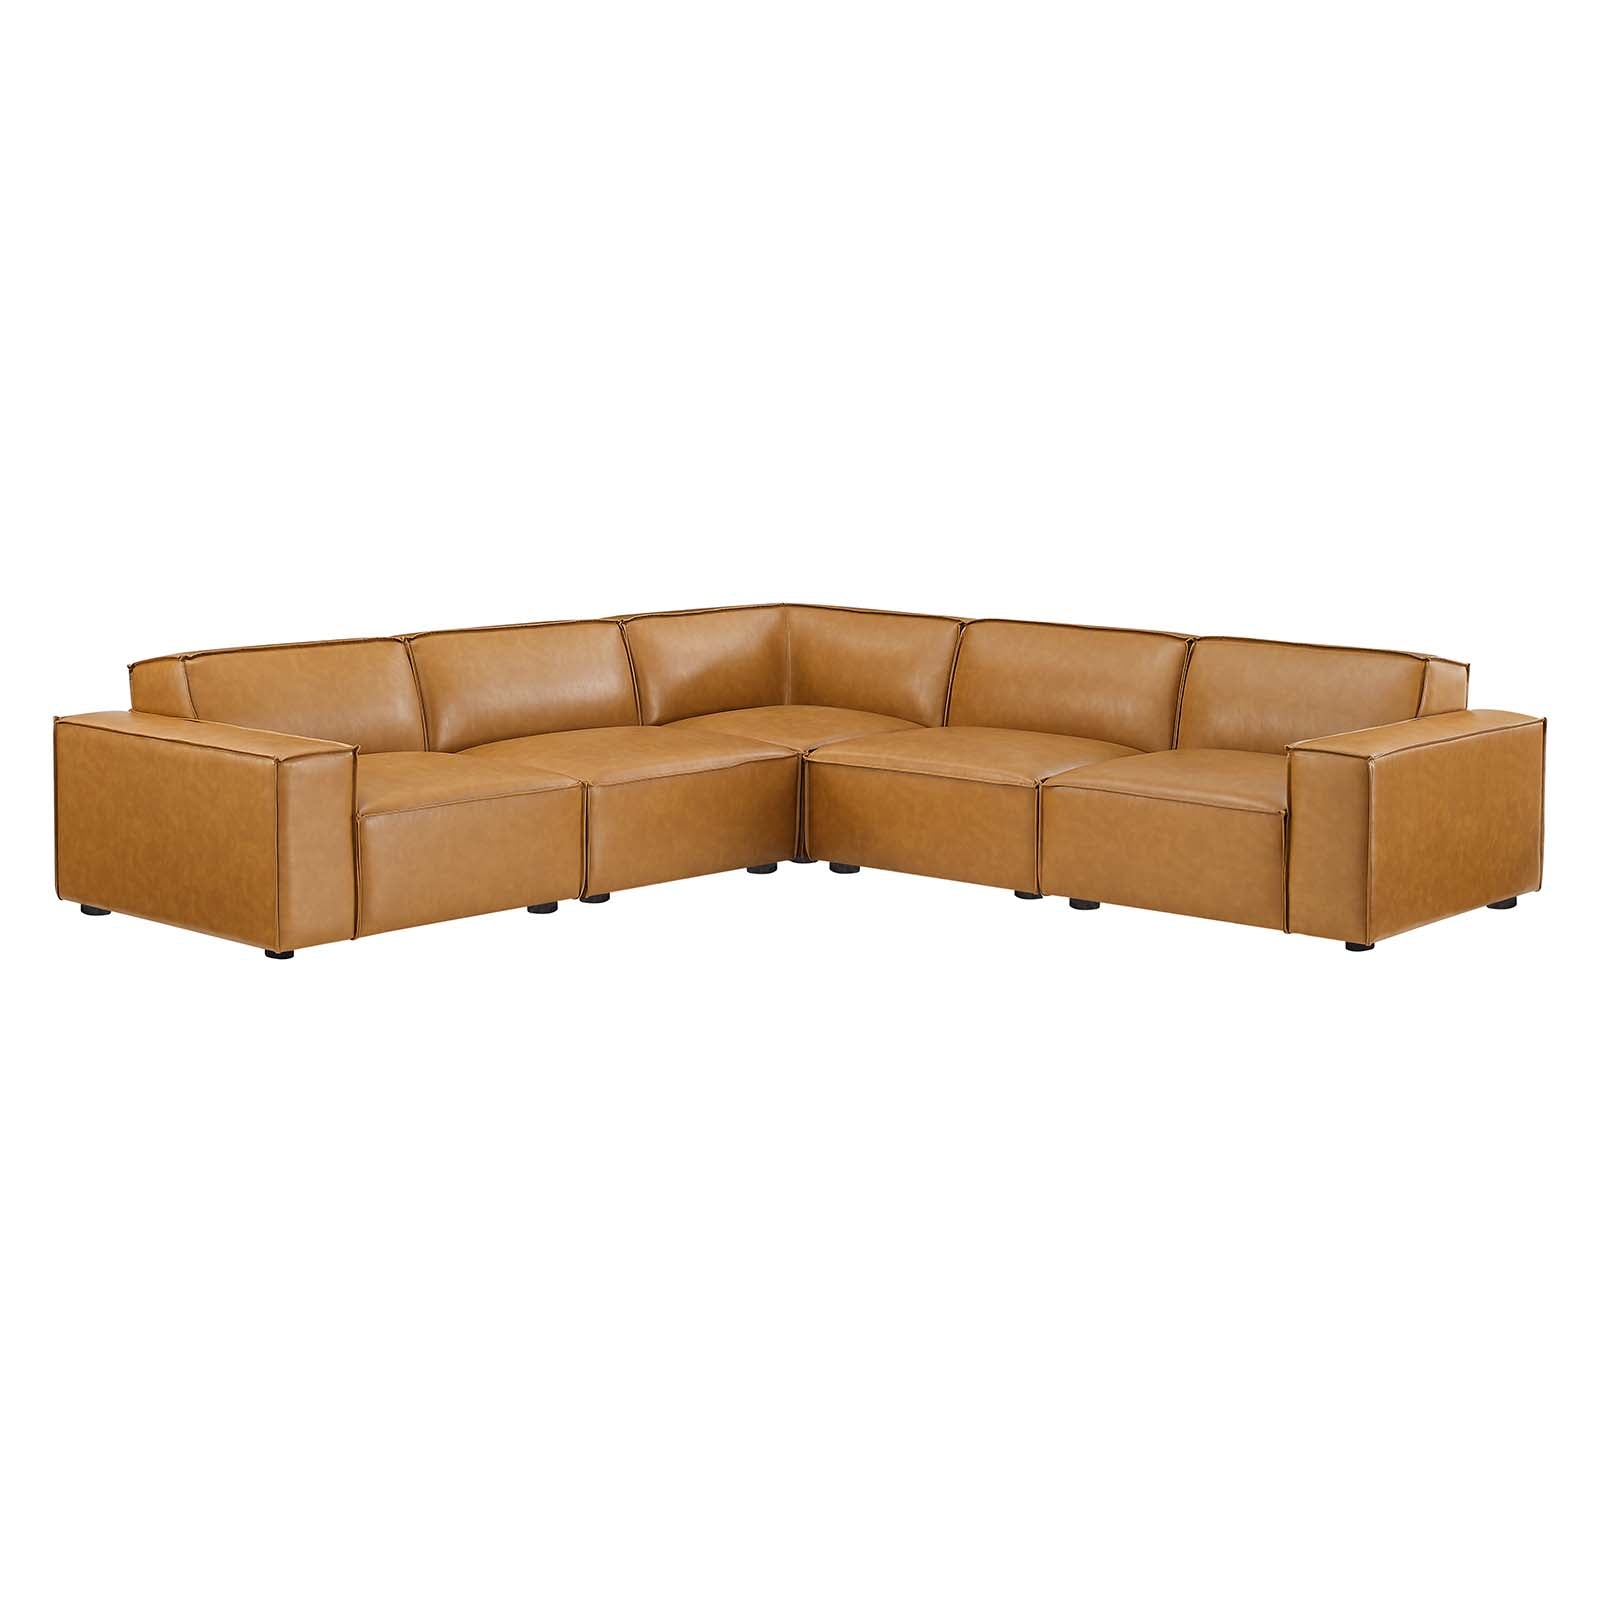 Modway Sectional Sofas - Restore 5-Piece Vegan Leather Sectional Sofa Tan 204"